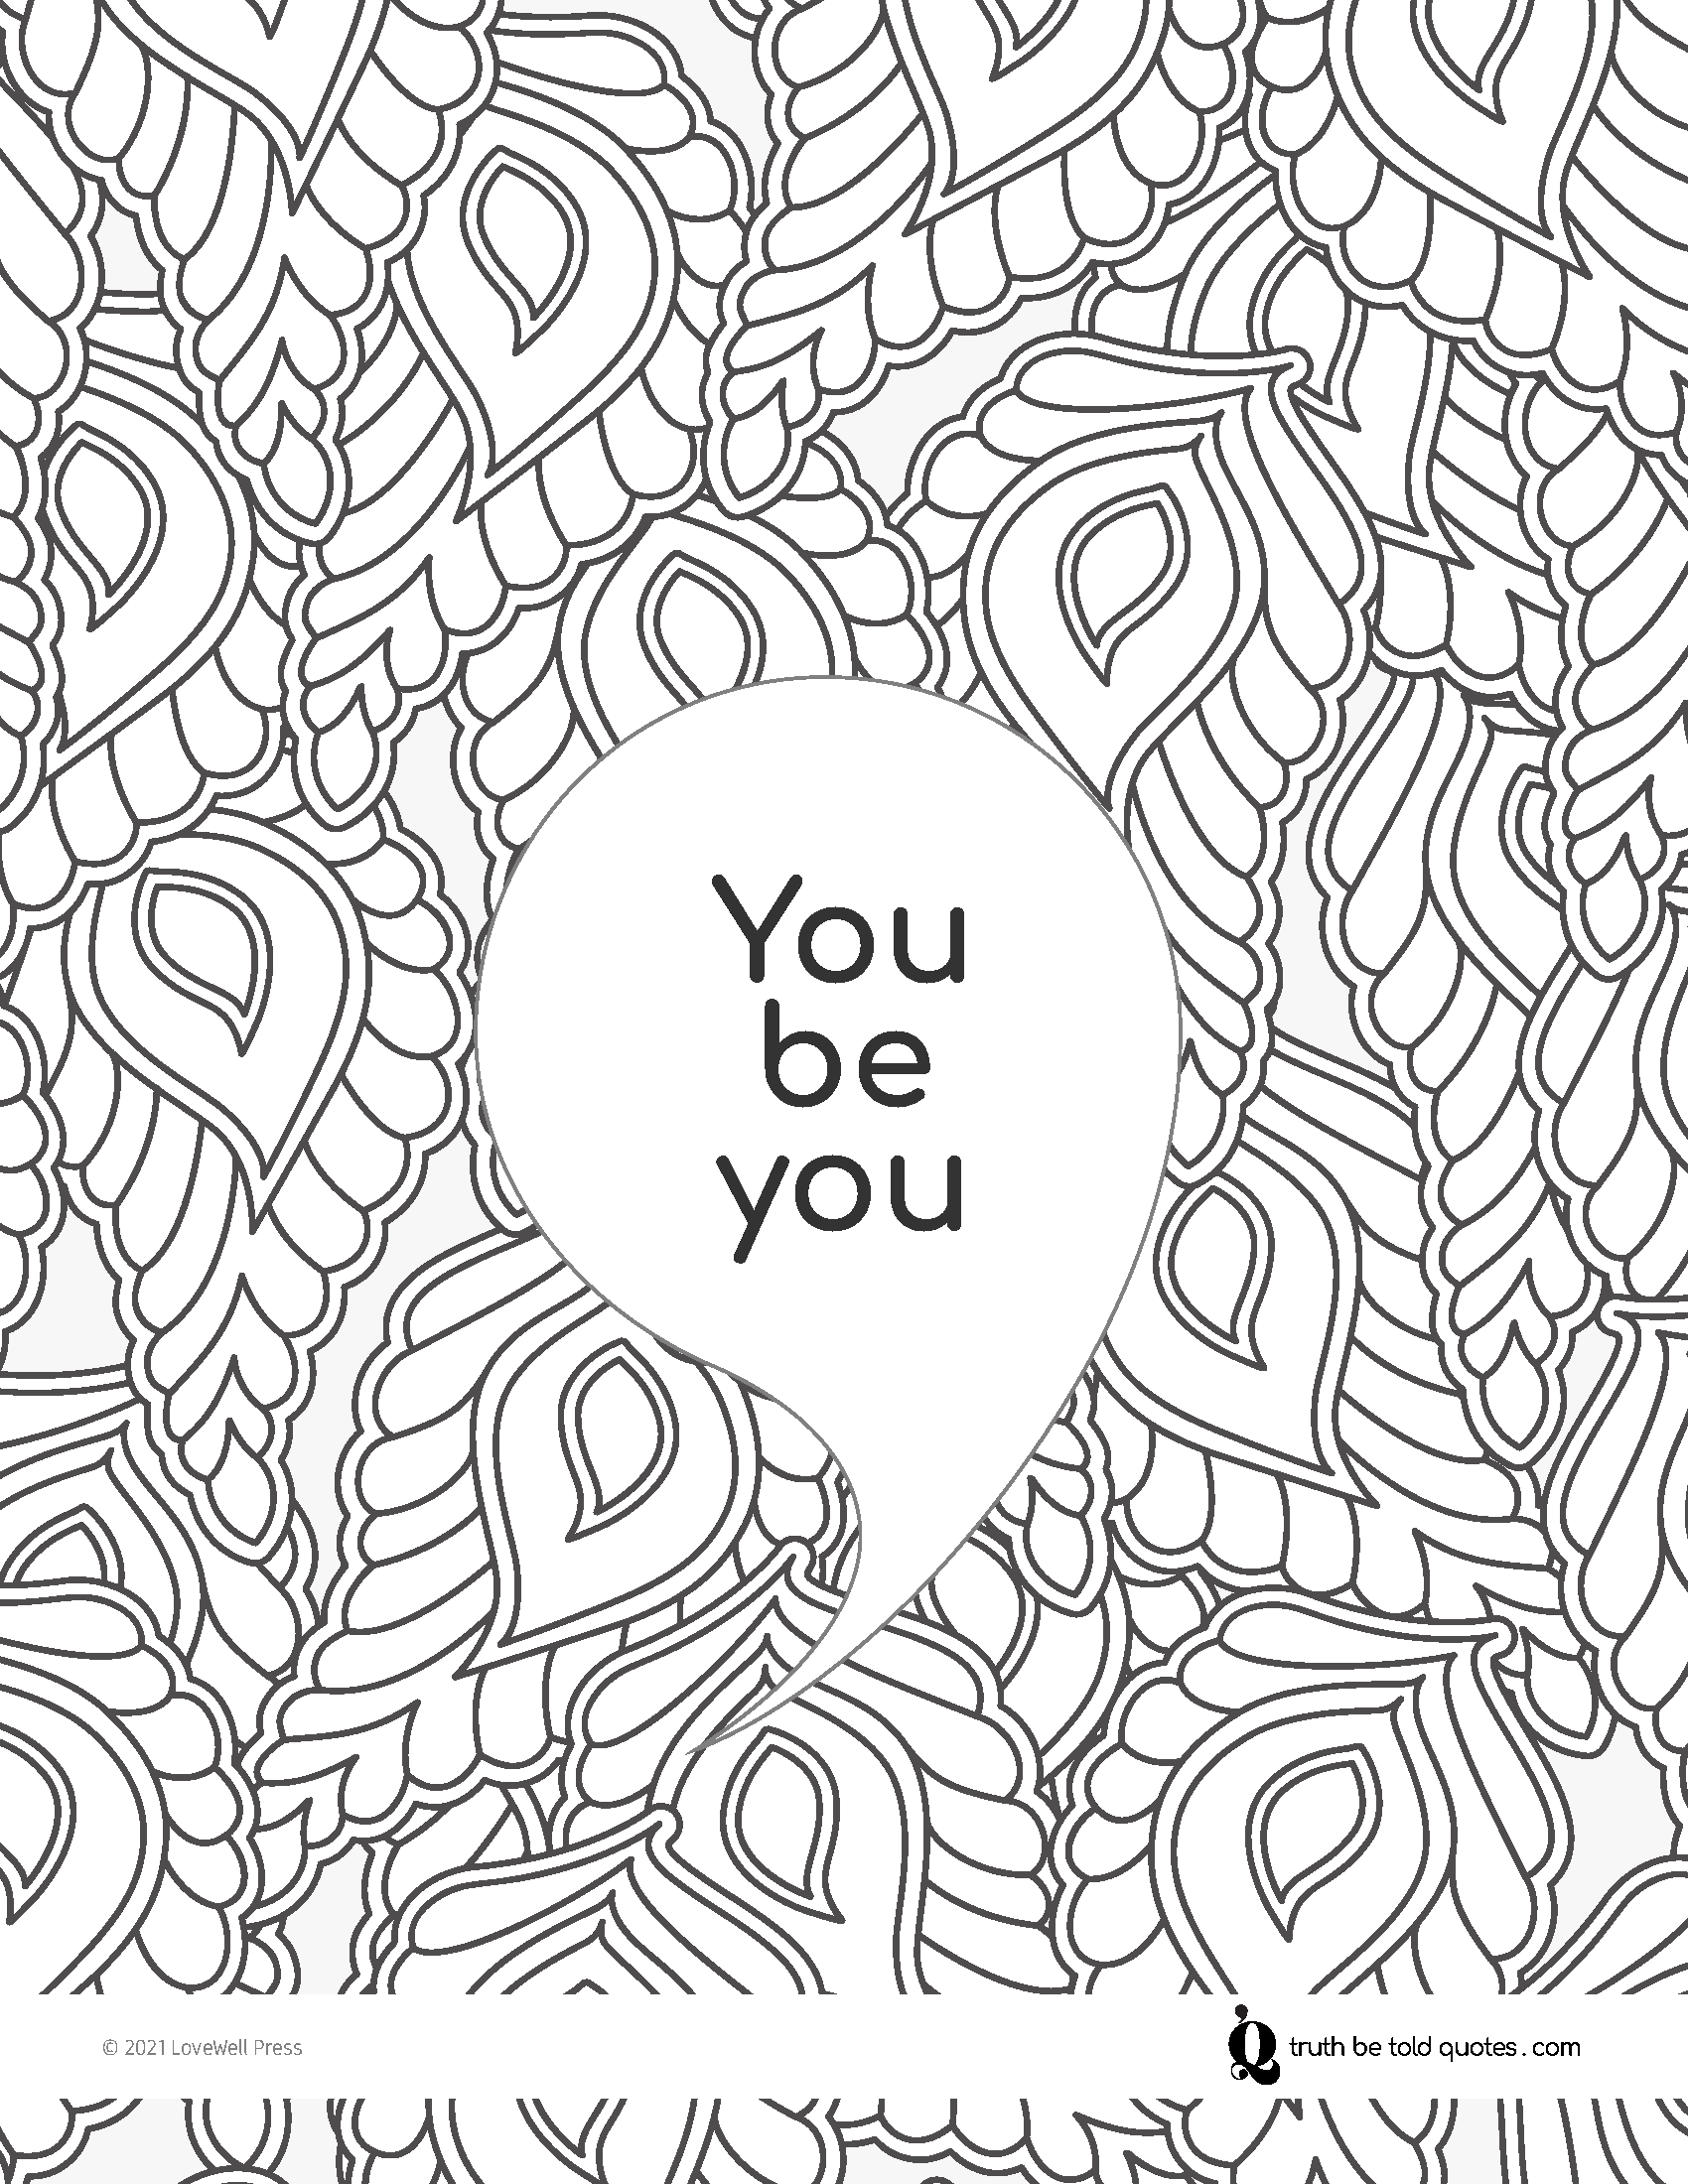 Free coloring page with quote about identity with imagery of peacock feathers